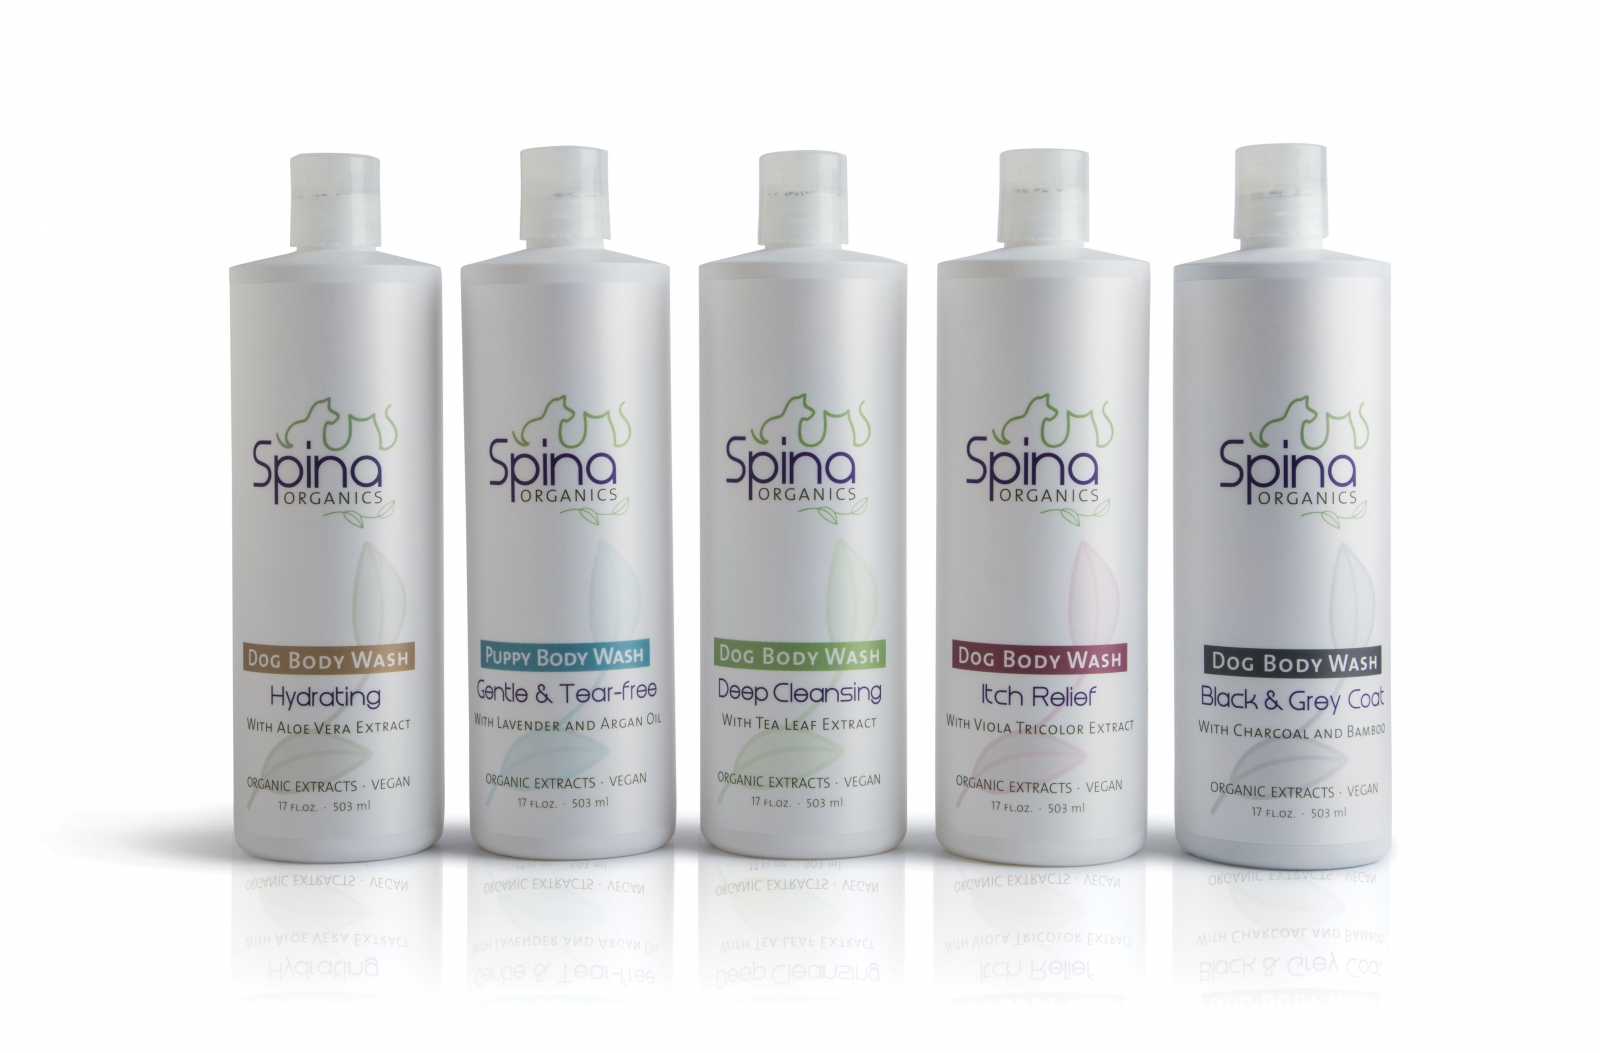 Spina Organics dog products for cleaning your dog